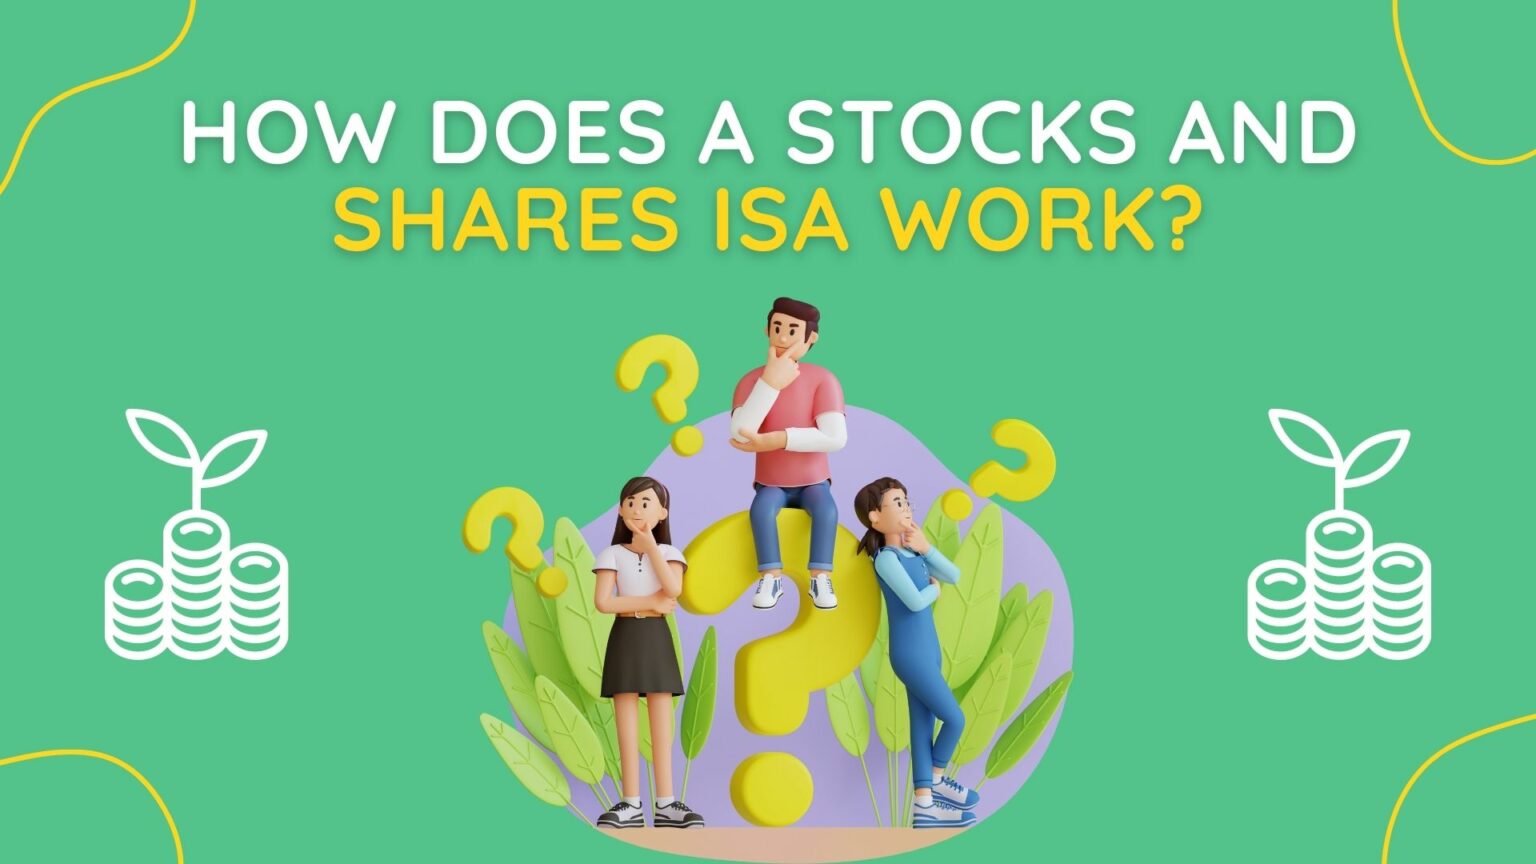 How Does A Stocks And Shares ISA Work? - Up the Gains